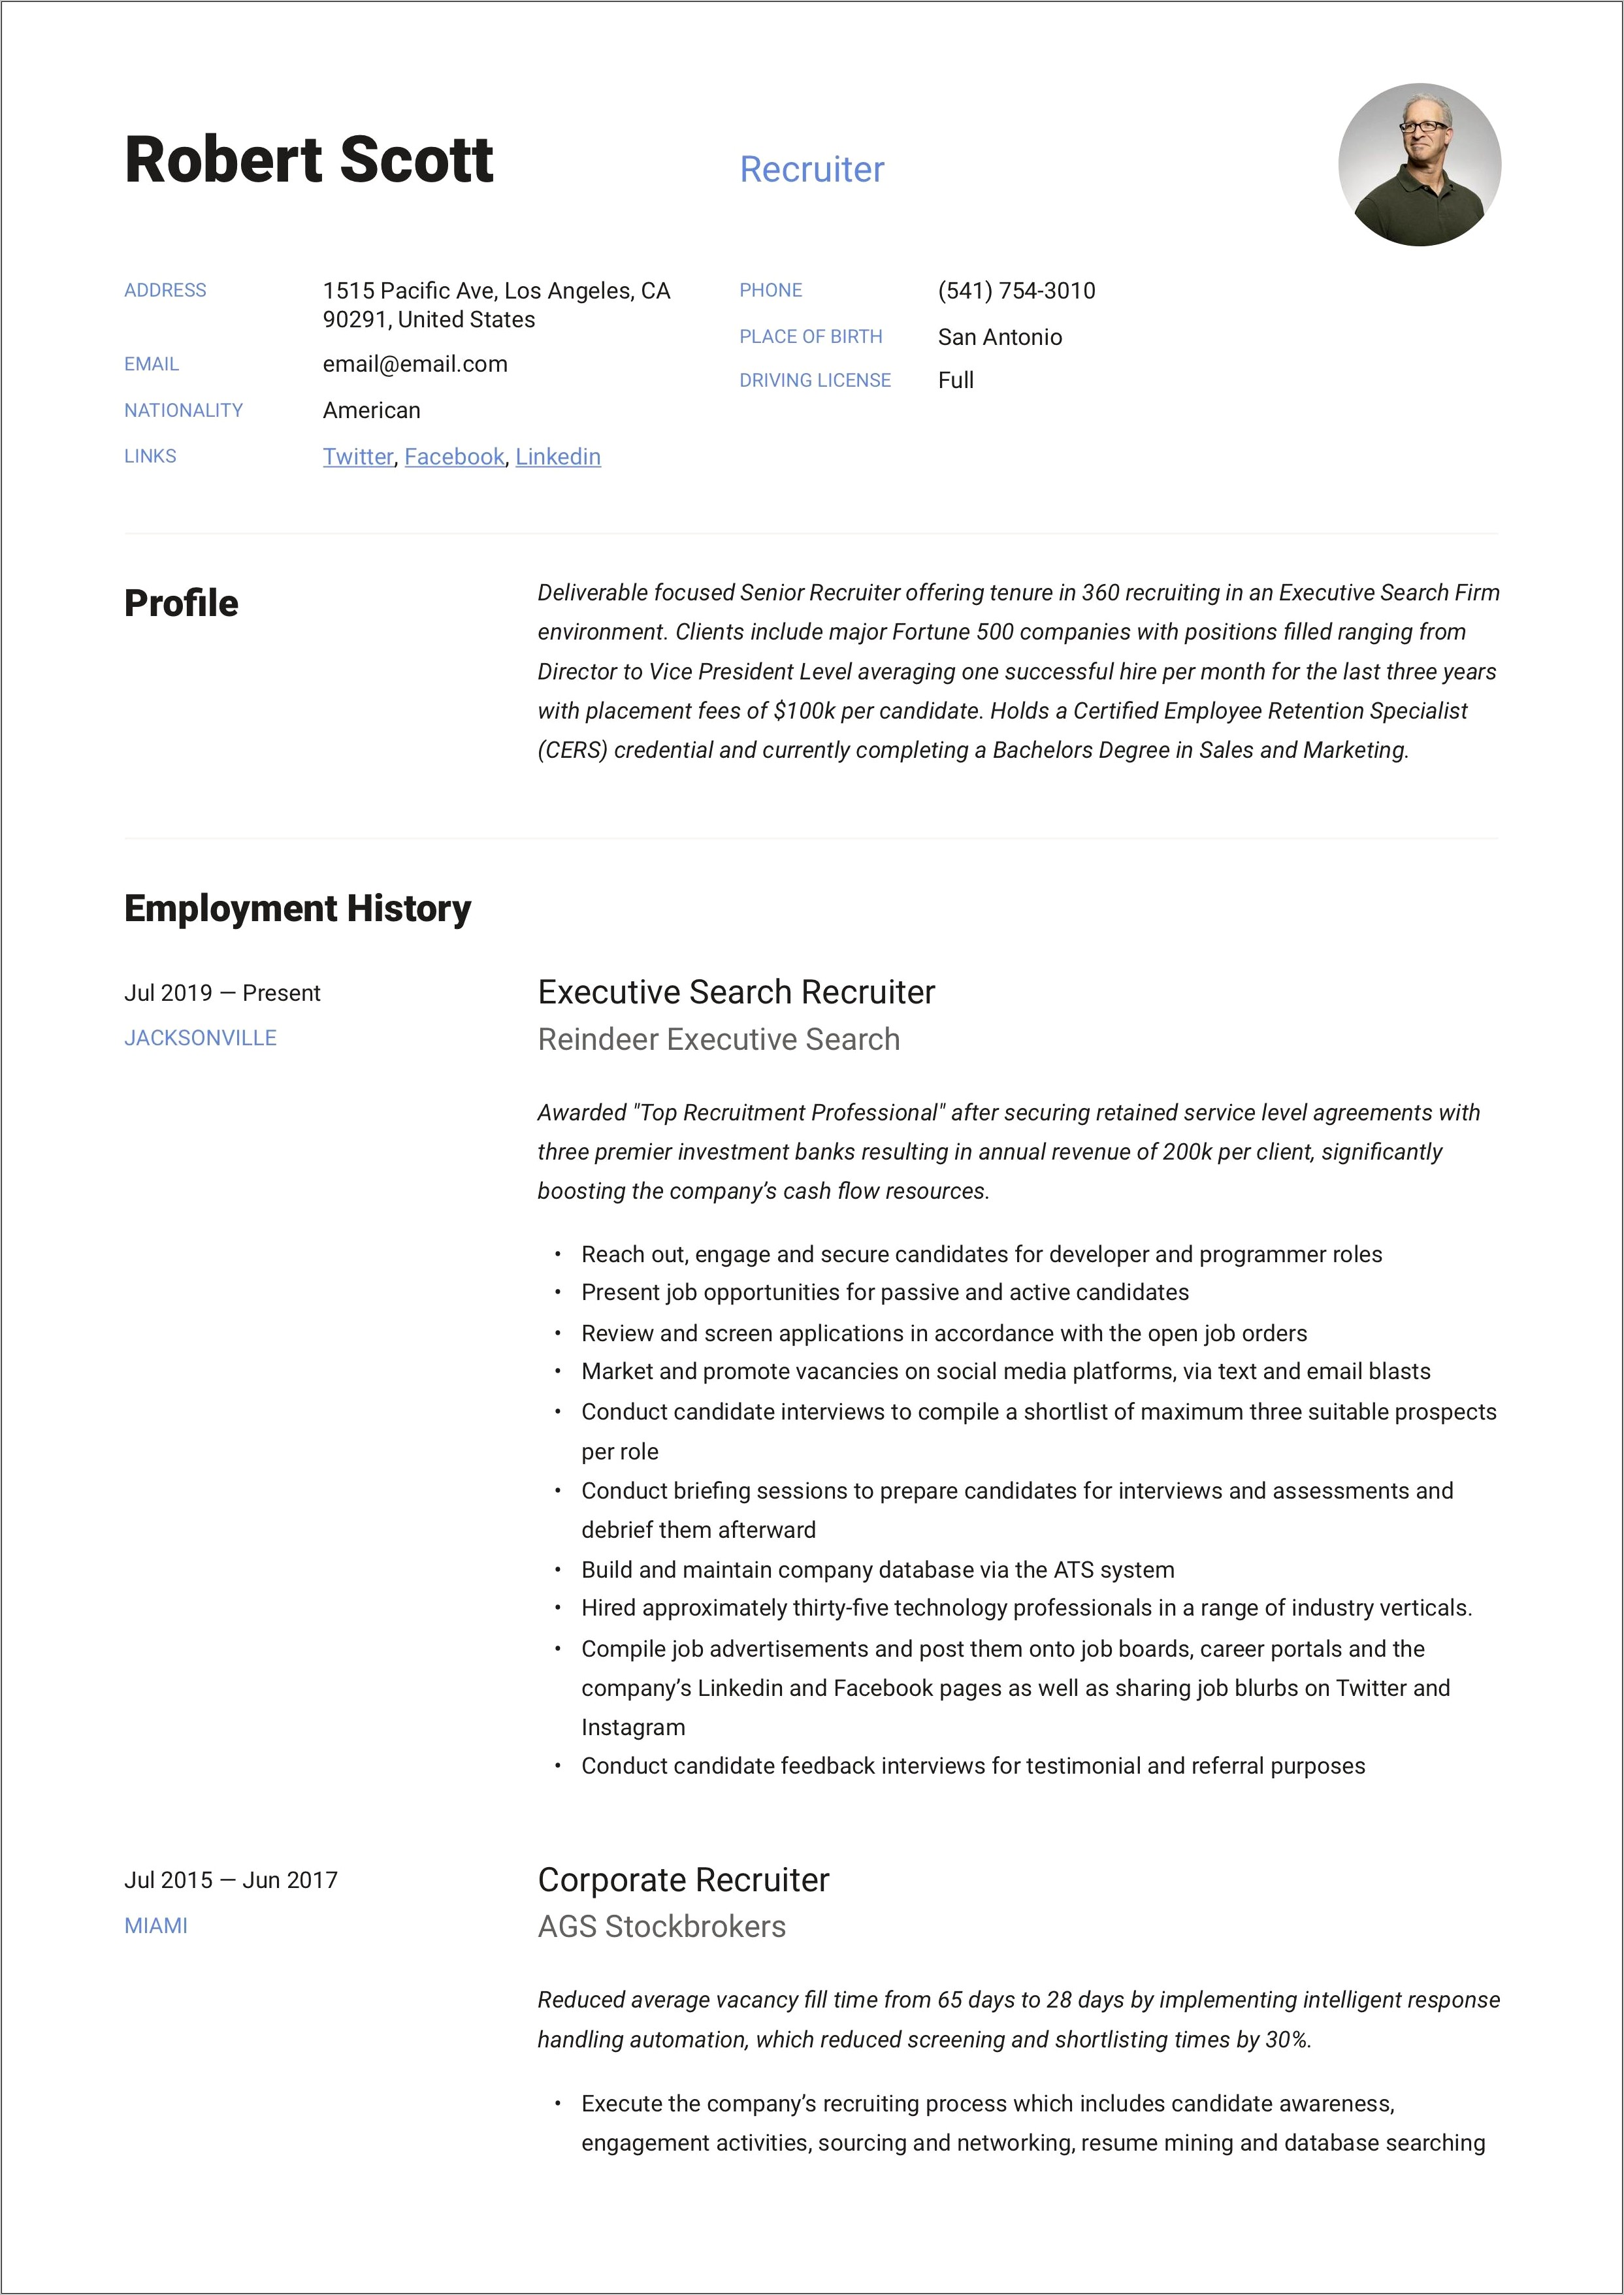 Resume Samples For Recruitment Specialist